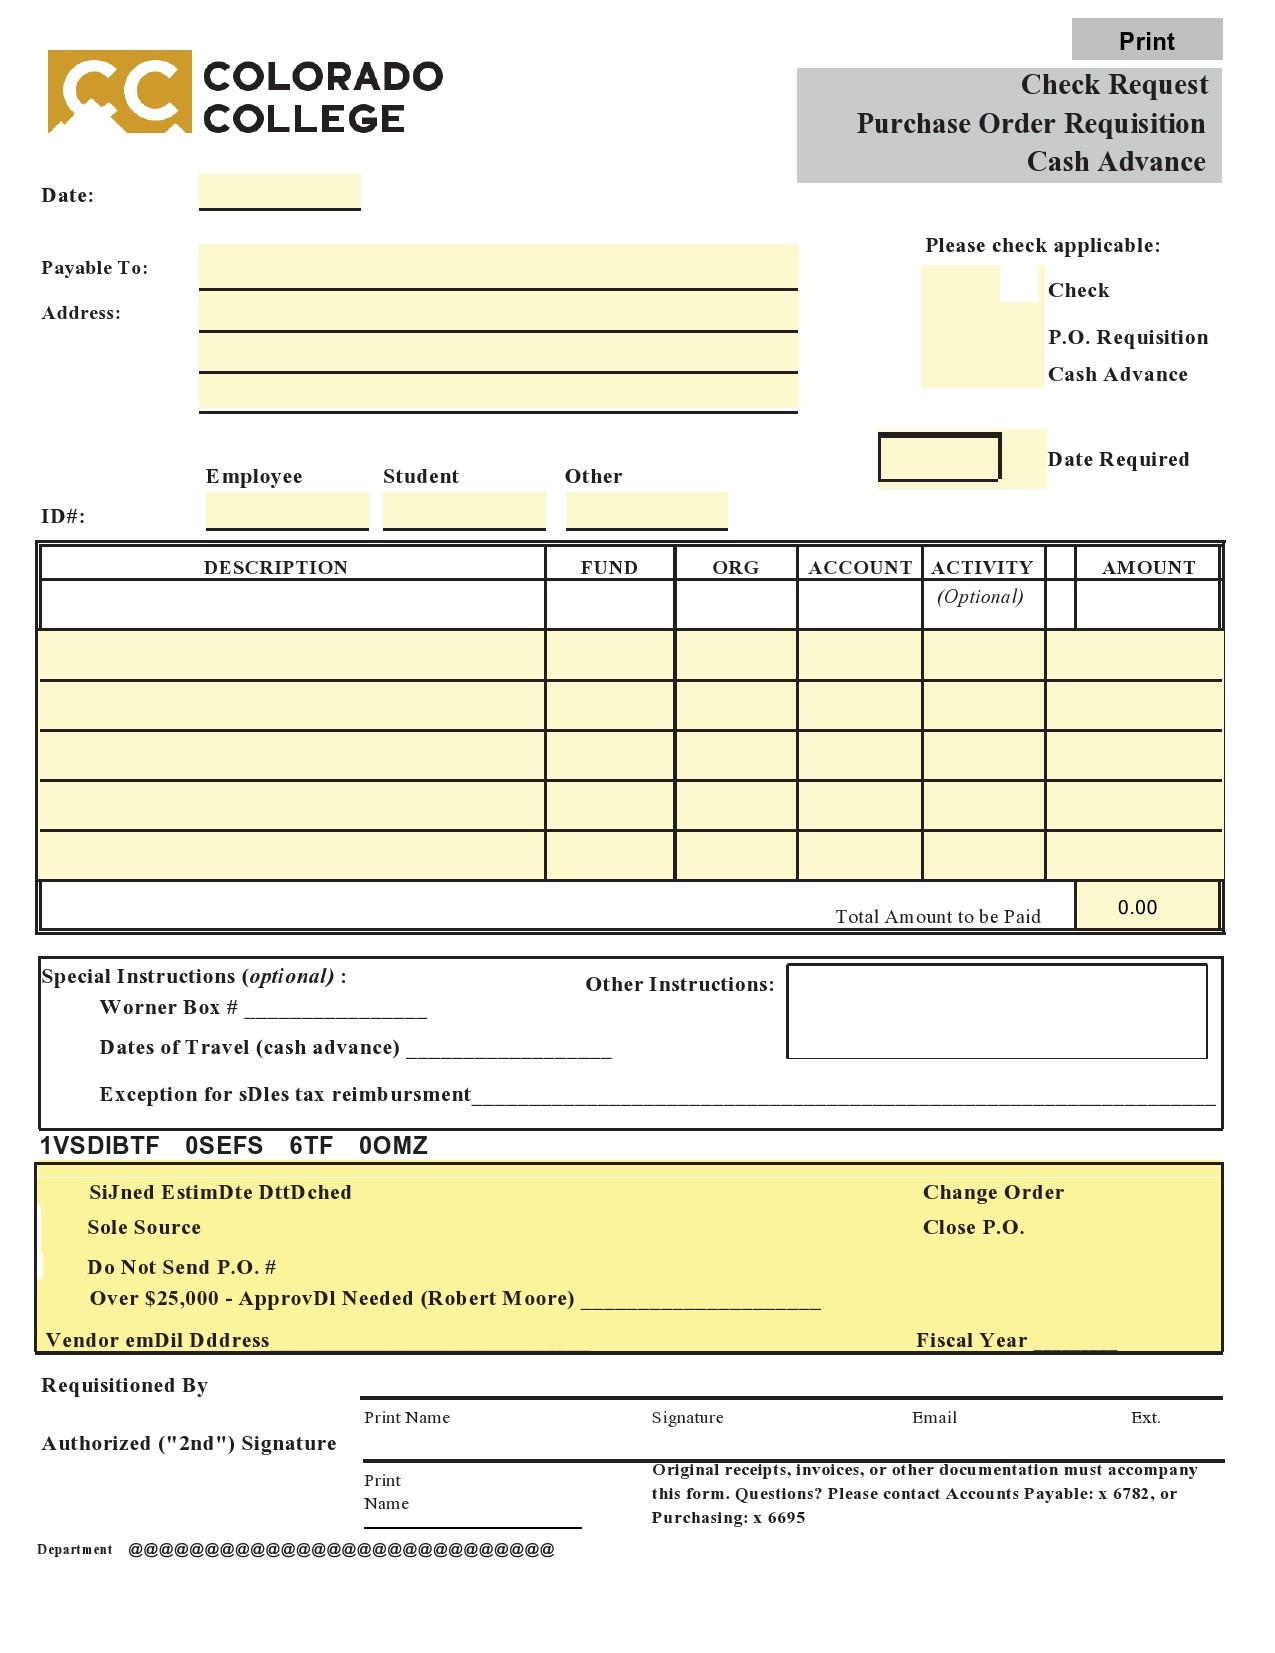 Free check request form 39